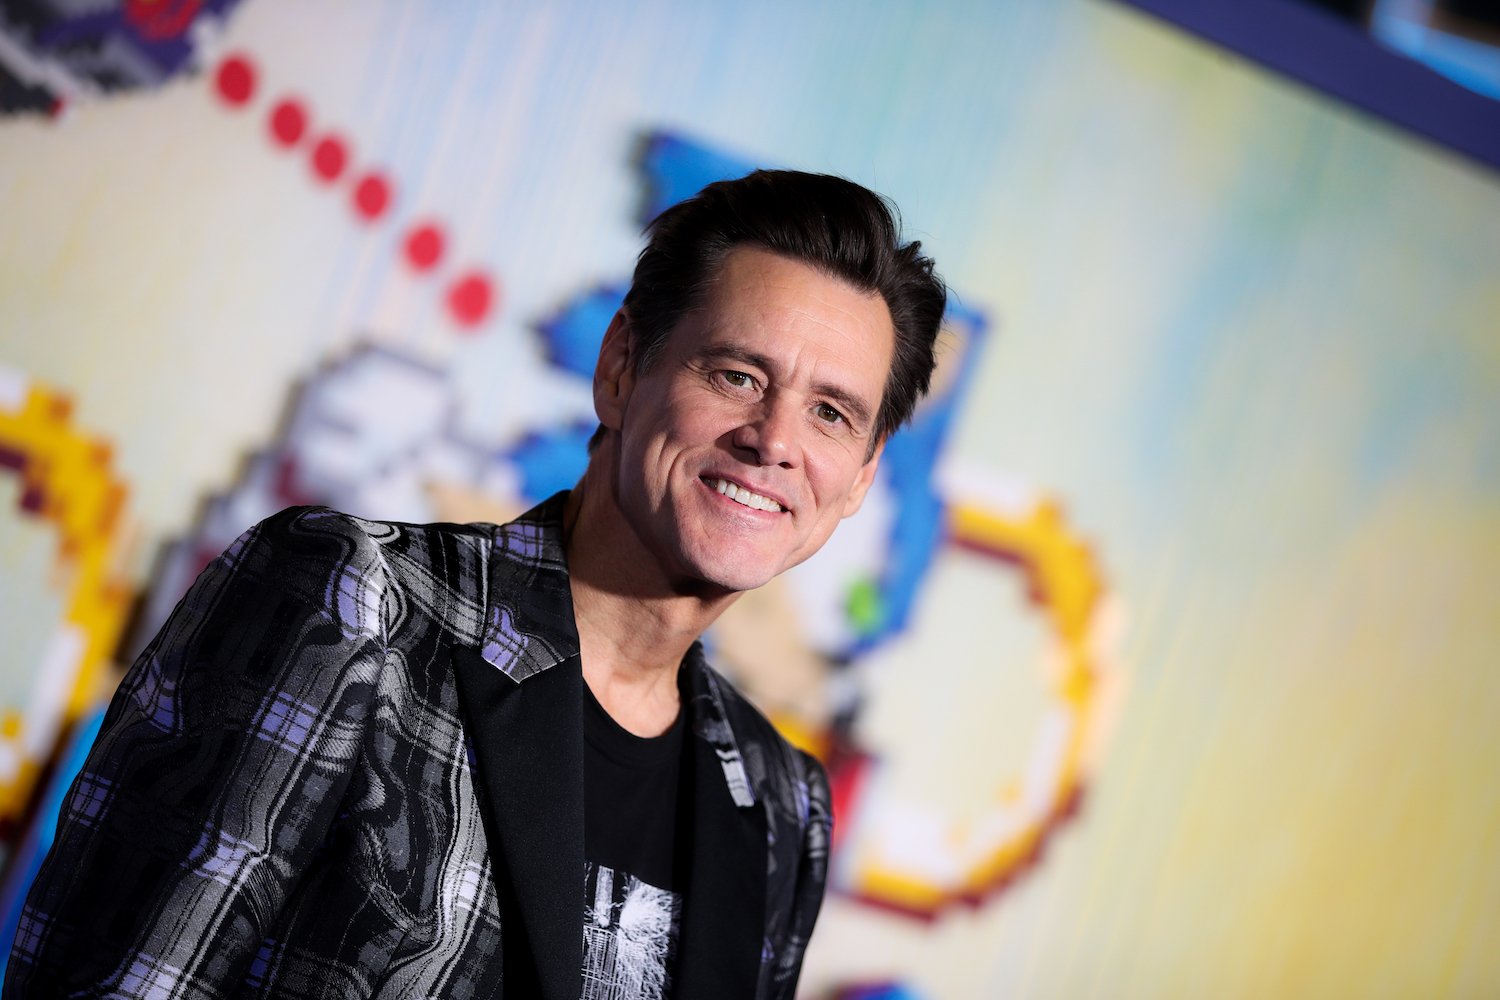 Jim Carrey attends the LA special screening of Sonic The Hedgehog at Regency Village Theatre on February 12, 2020